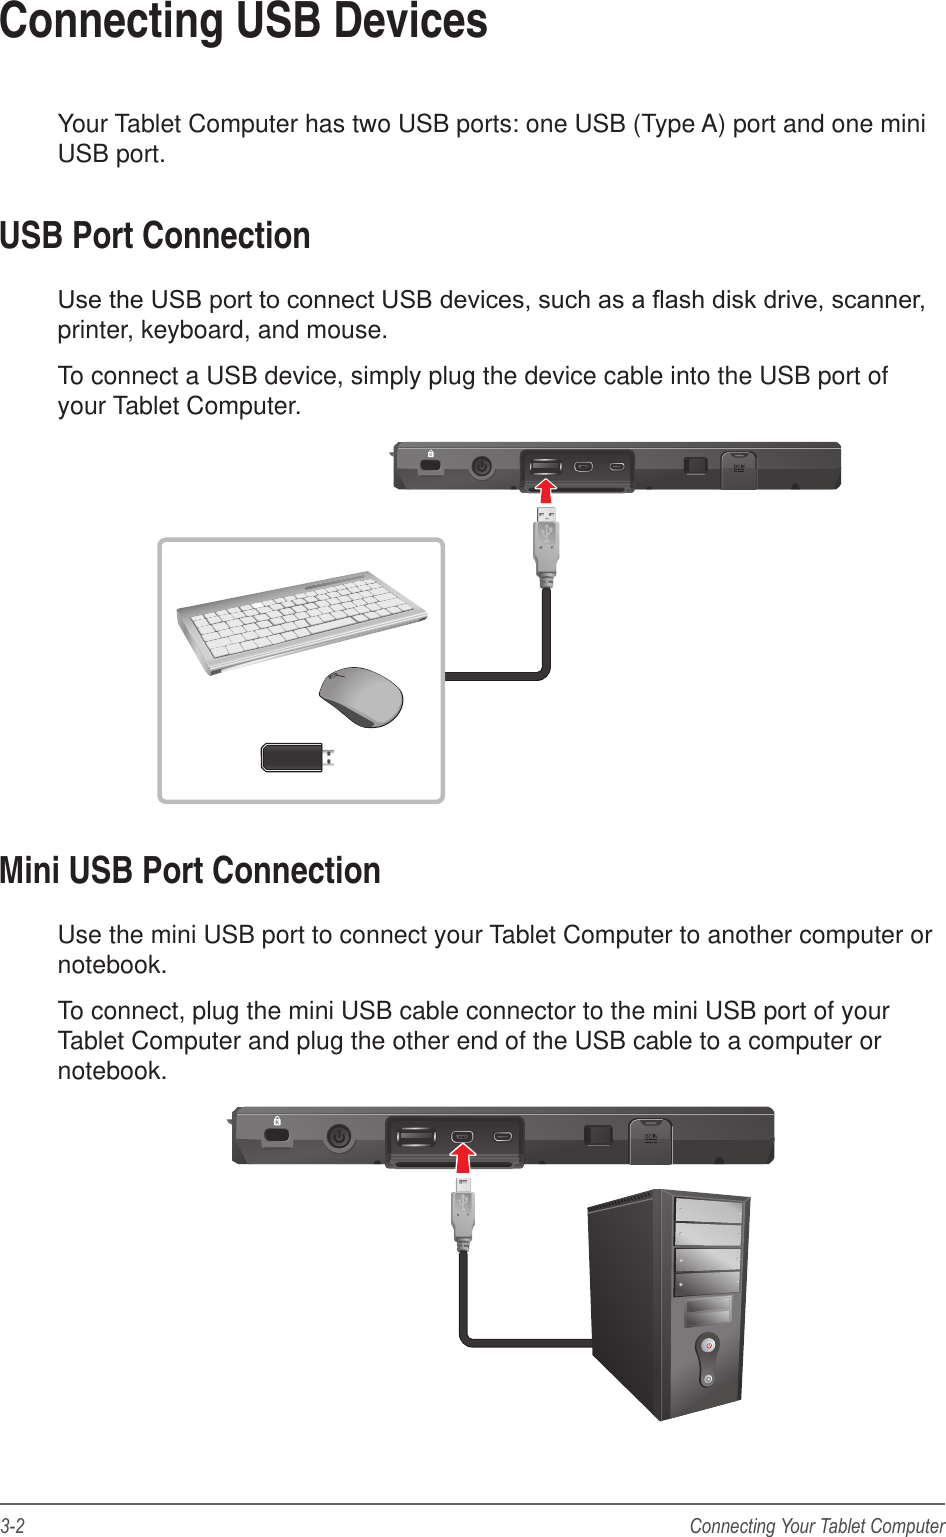 3-2 Connecting Your Tablet ComputerConnecting USB DevicesYour Tablet Computer has two USB ports: one USB (Type A) port and one mini USB port. USB Port ConnectionUse the USB port to connect USB devices, such as a ash disk drive, scanner, printer, keyboard, and mouse.To connect a USB device, simply plug the device cable into the USB port of your Tablet Computer.Mini USB Port ConnectionUse the mini USB port to connect your Tablet Computer to another computer or notebook.To connect, plug the mini USB cable connector to the mini USB port of your Tablet Computer and plug the other end of the USB cable to a computer or notebook.